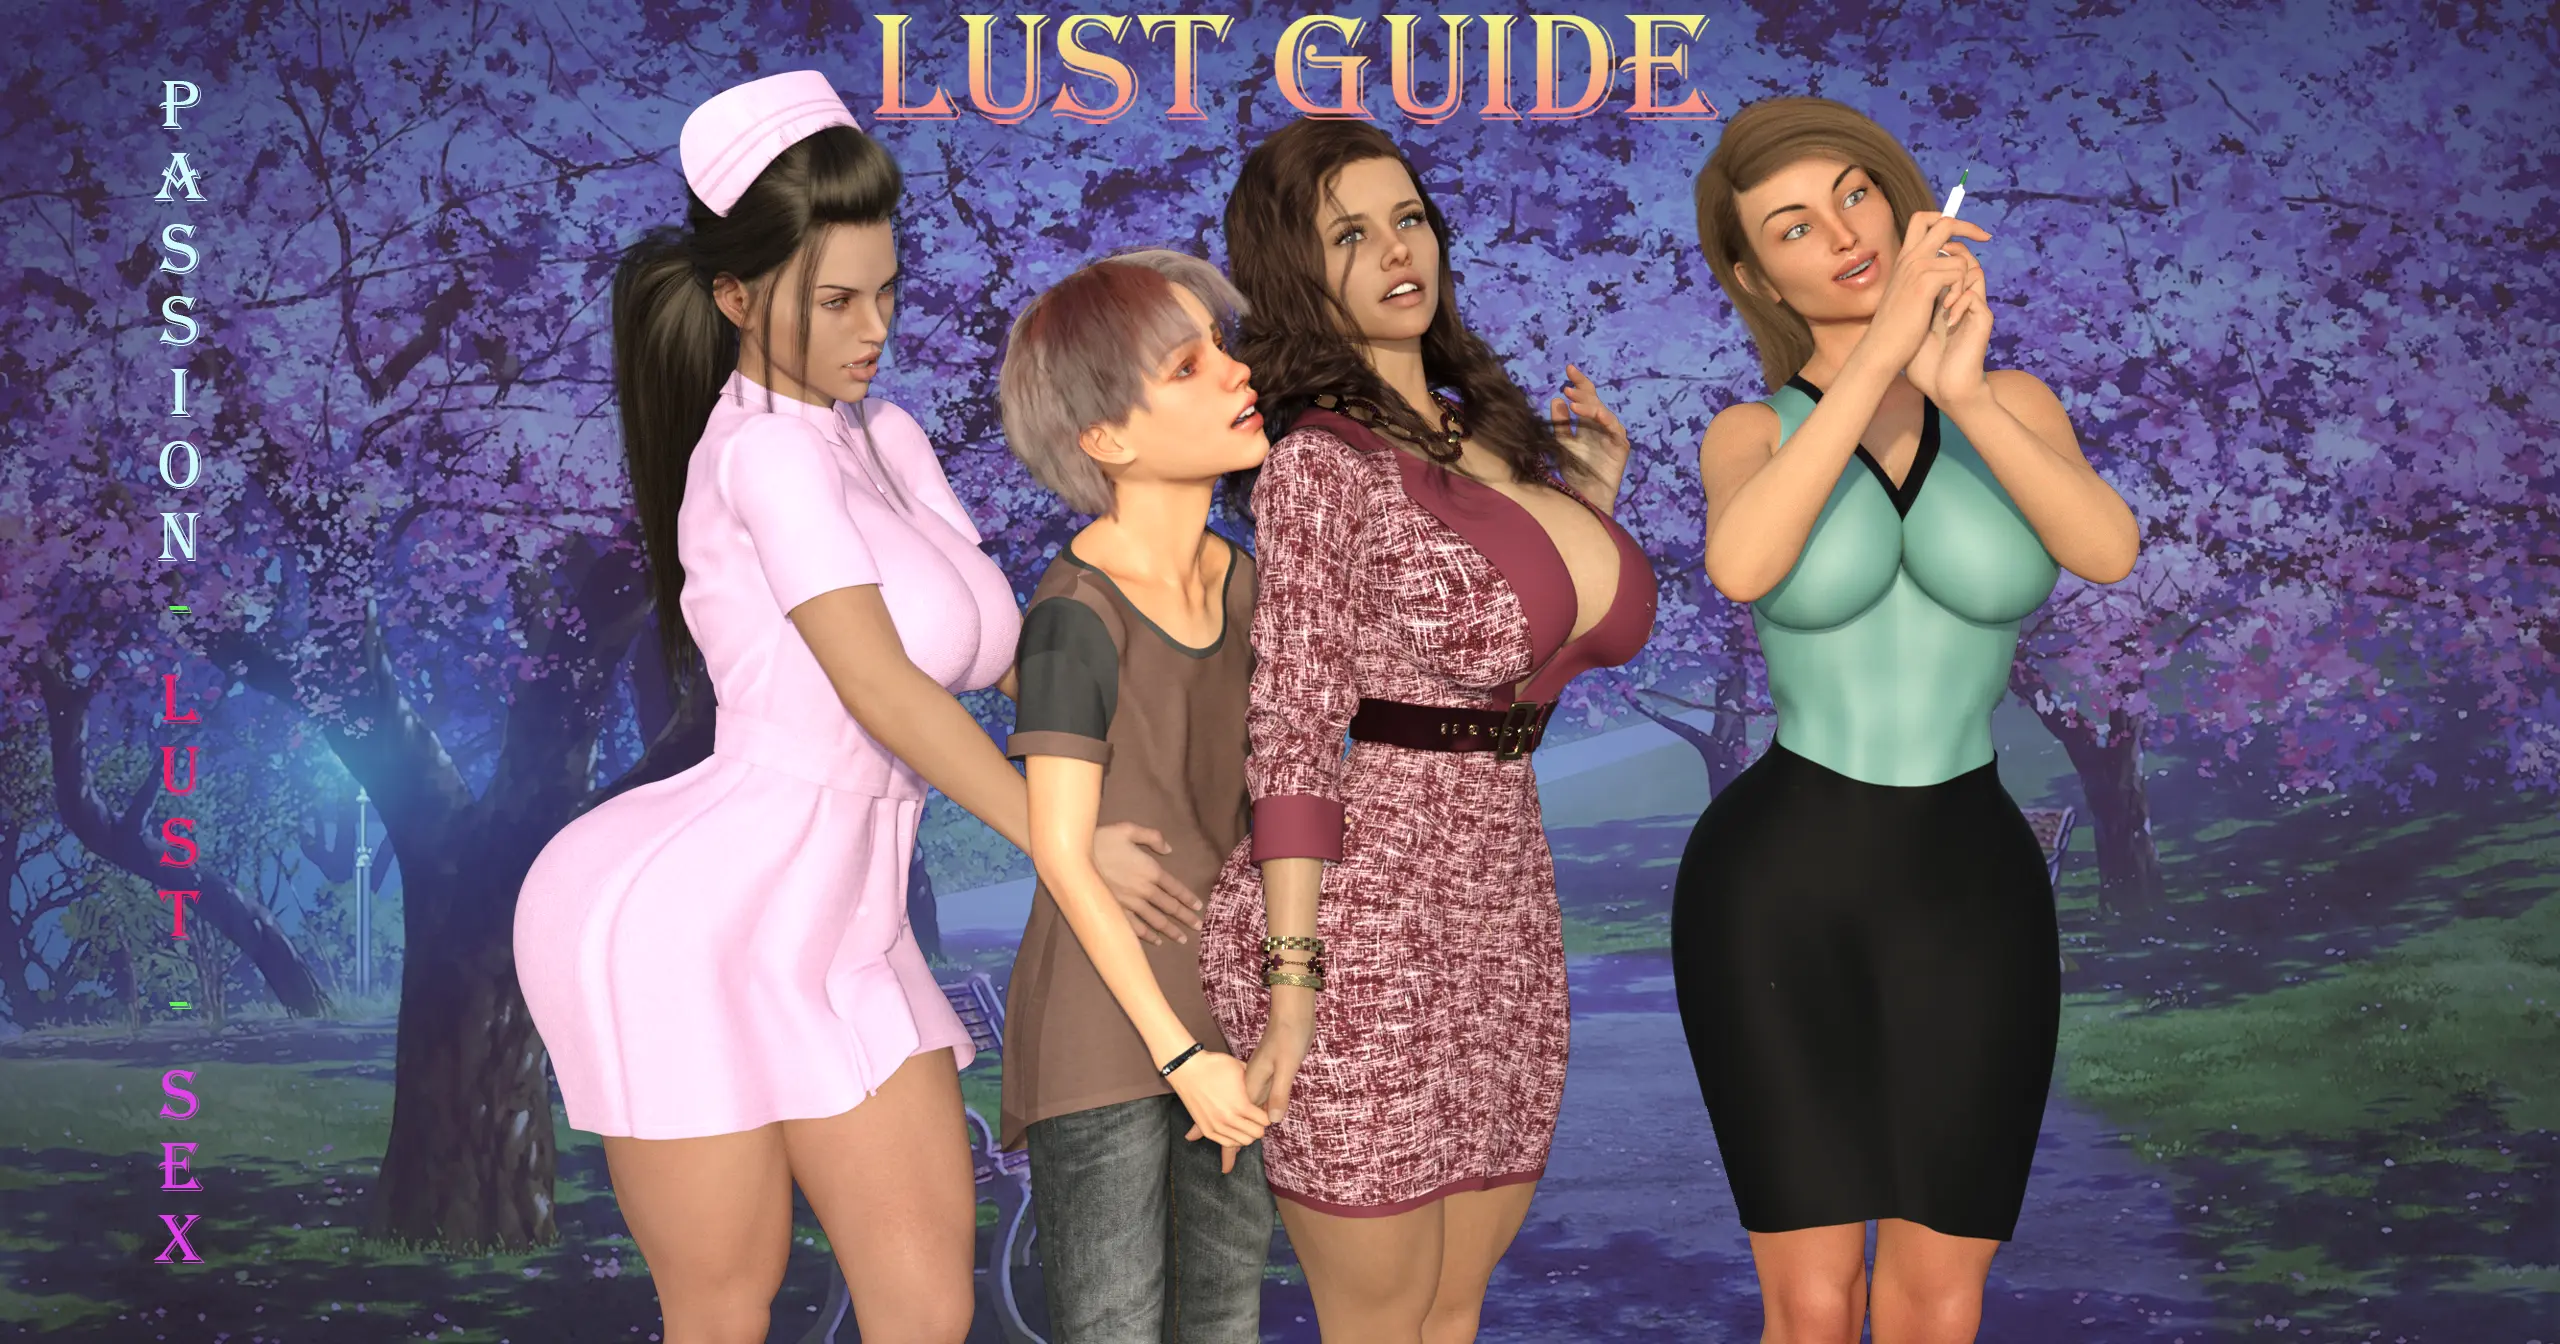 Lust Guide main image